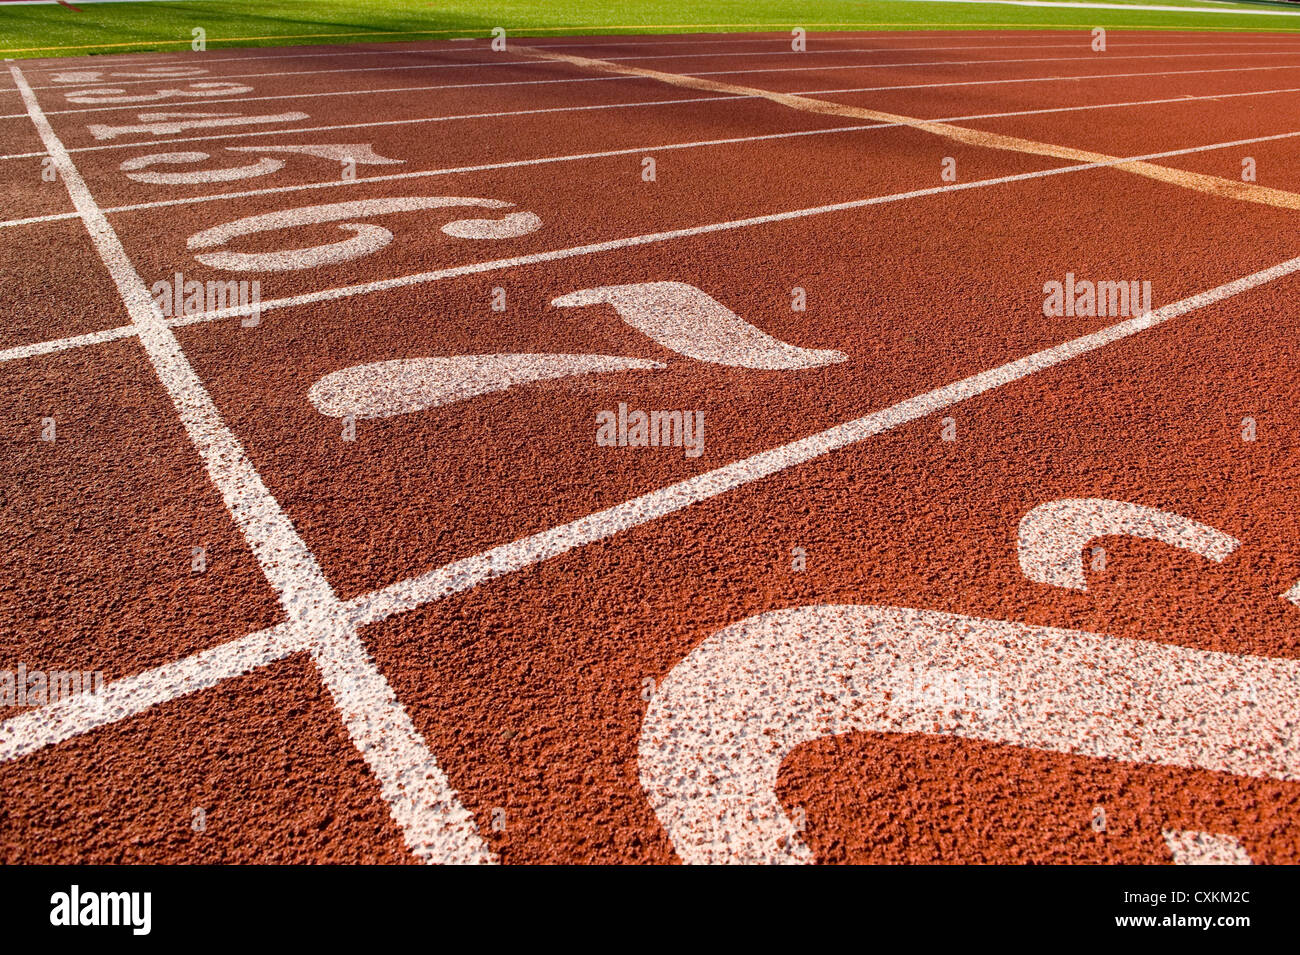 The running lane markers on a running track creating a track and field background Stock Photo